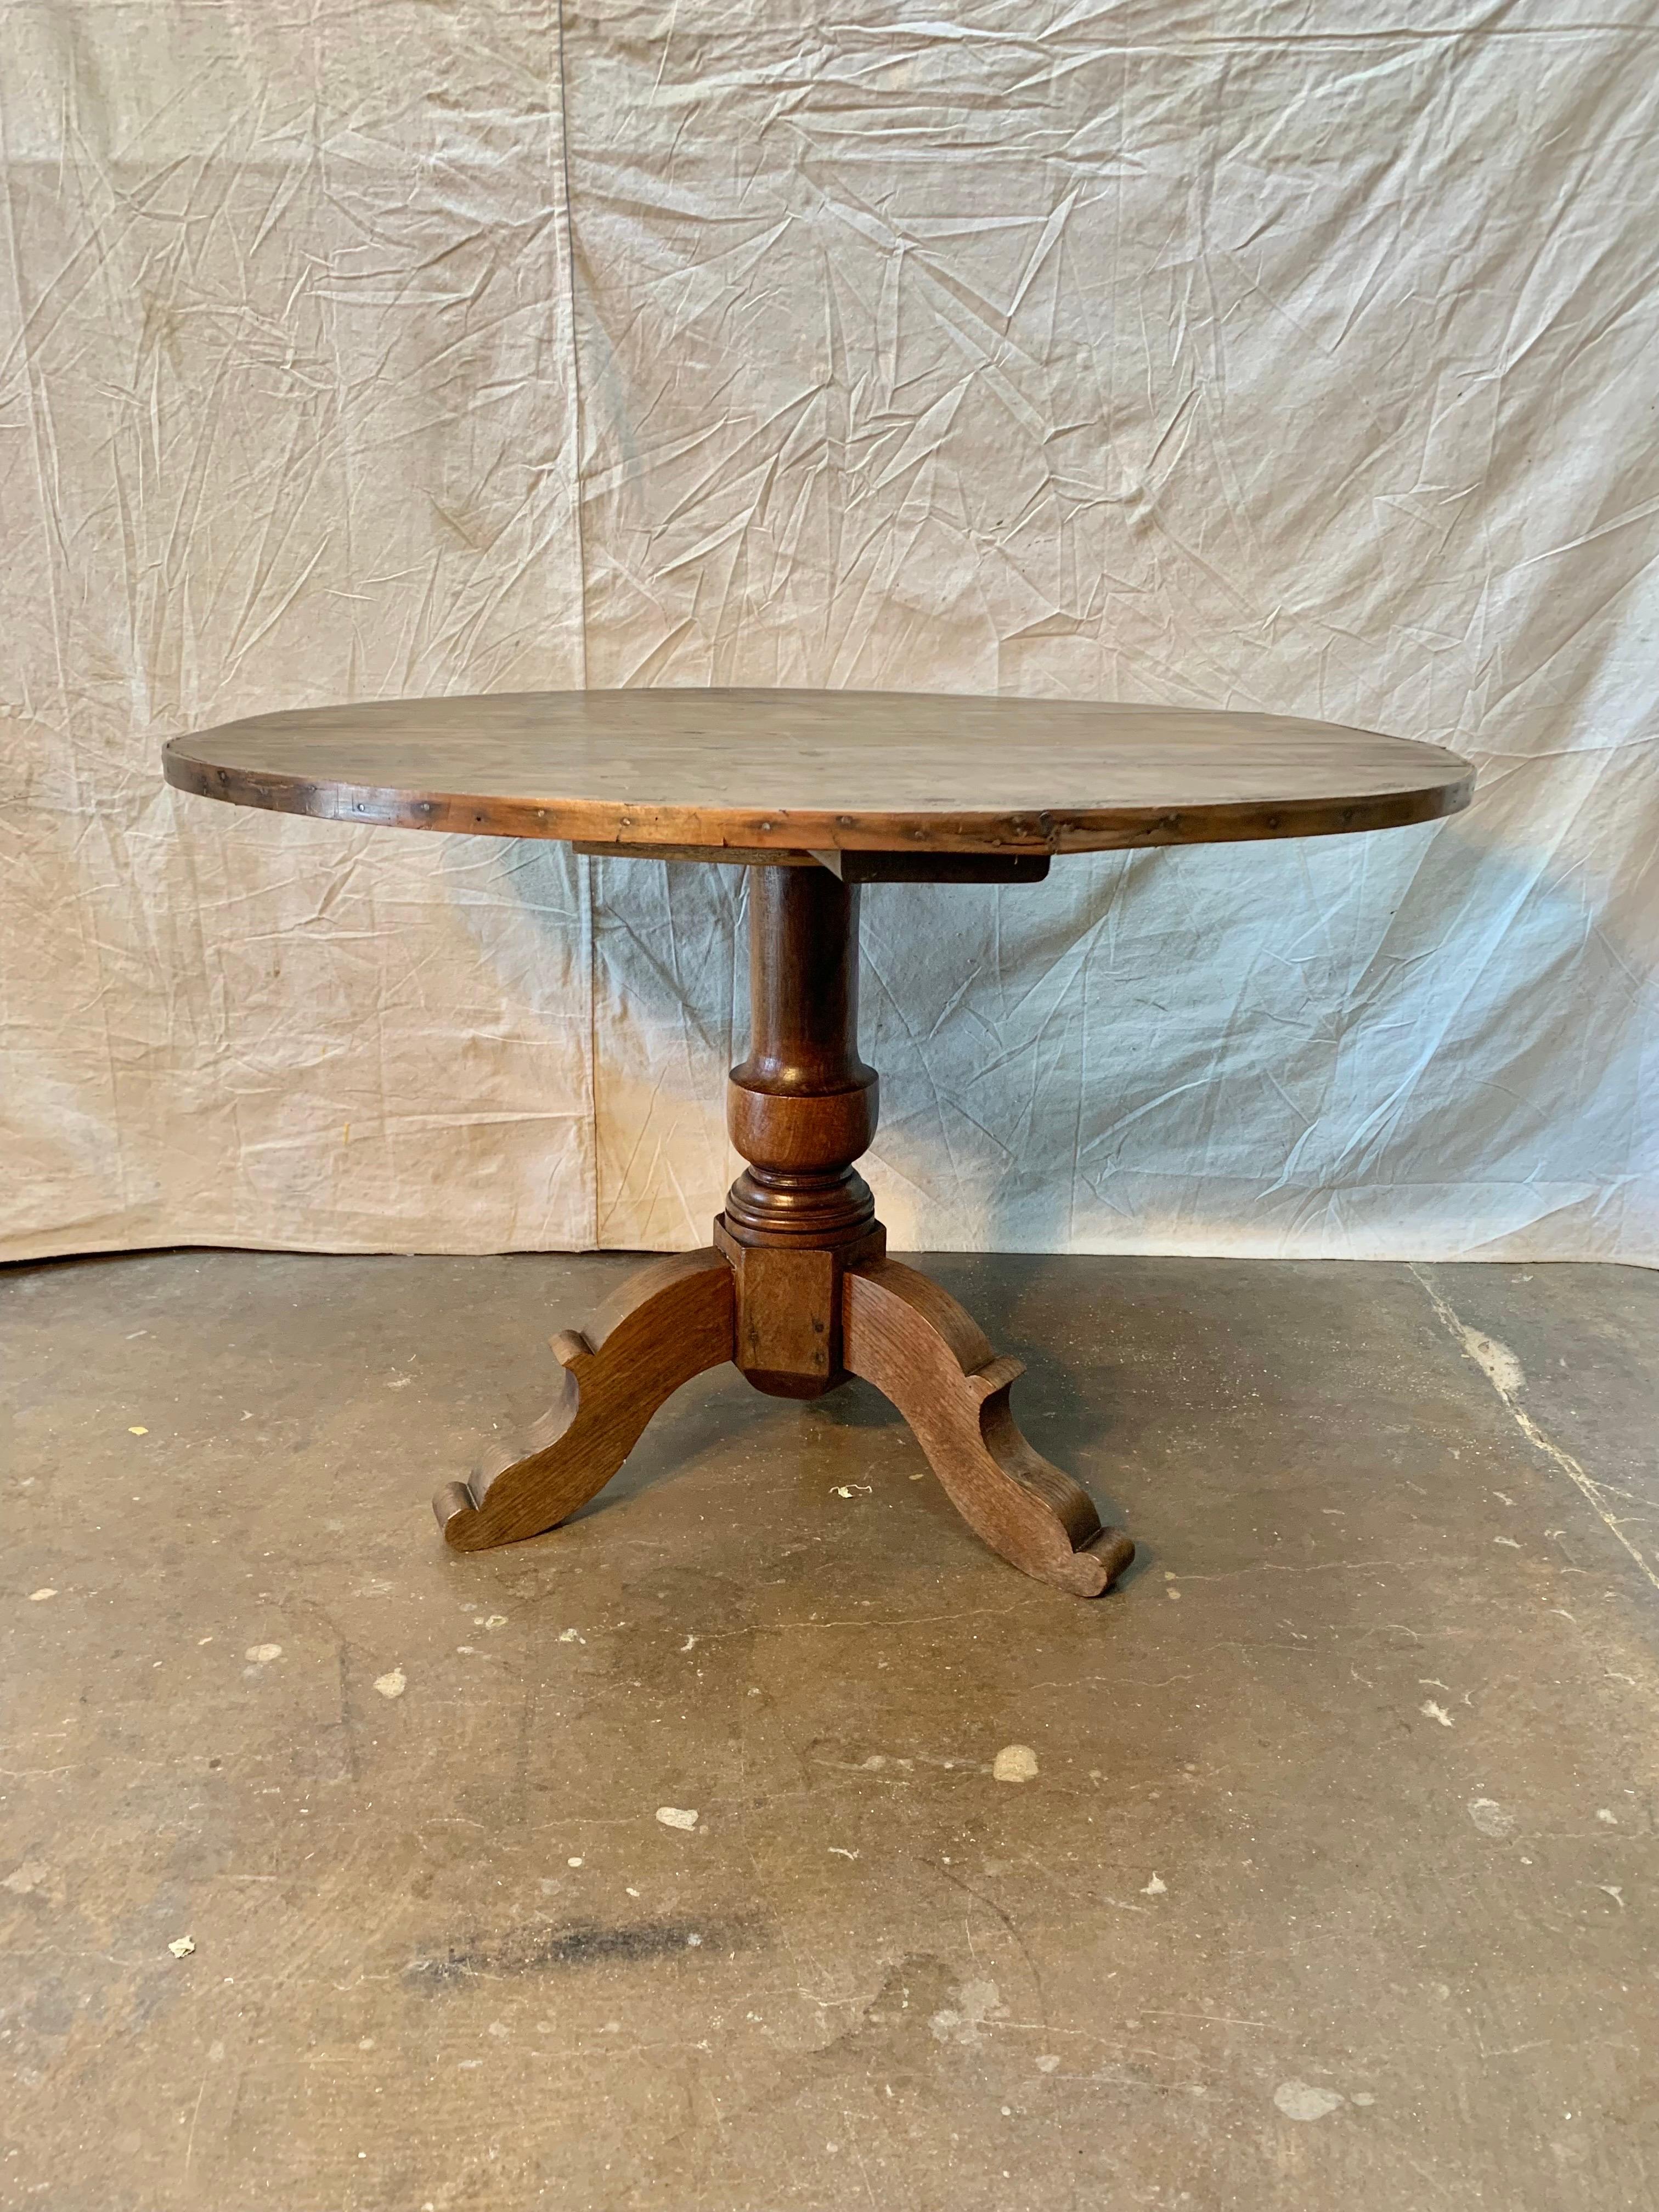 Found in France this 19th Century French Mixed Wood Center Table features a banded pine top raised on a walnut turned baluster support on a tripod base with three carved legs. The simplicity and size of the table lends it to be used as a center hall